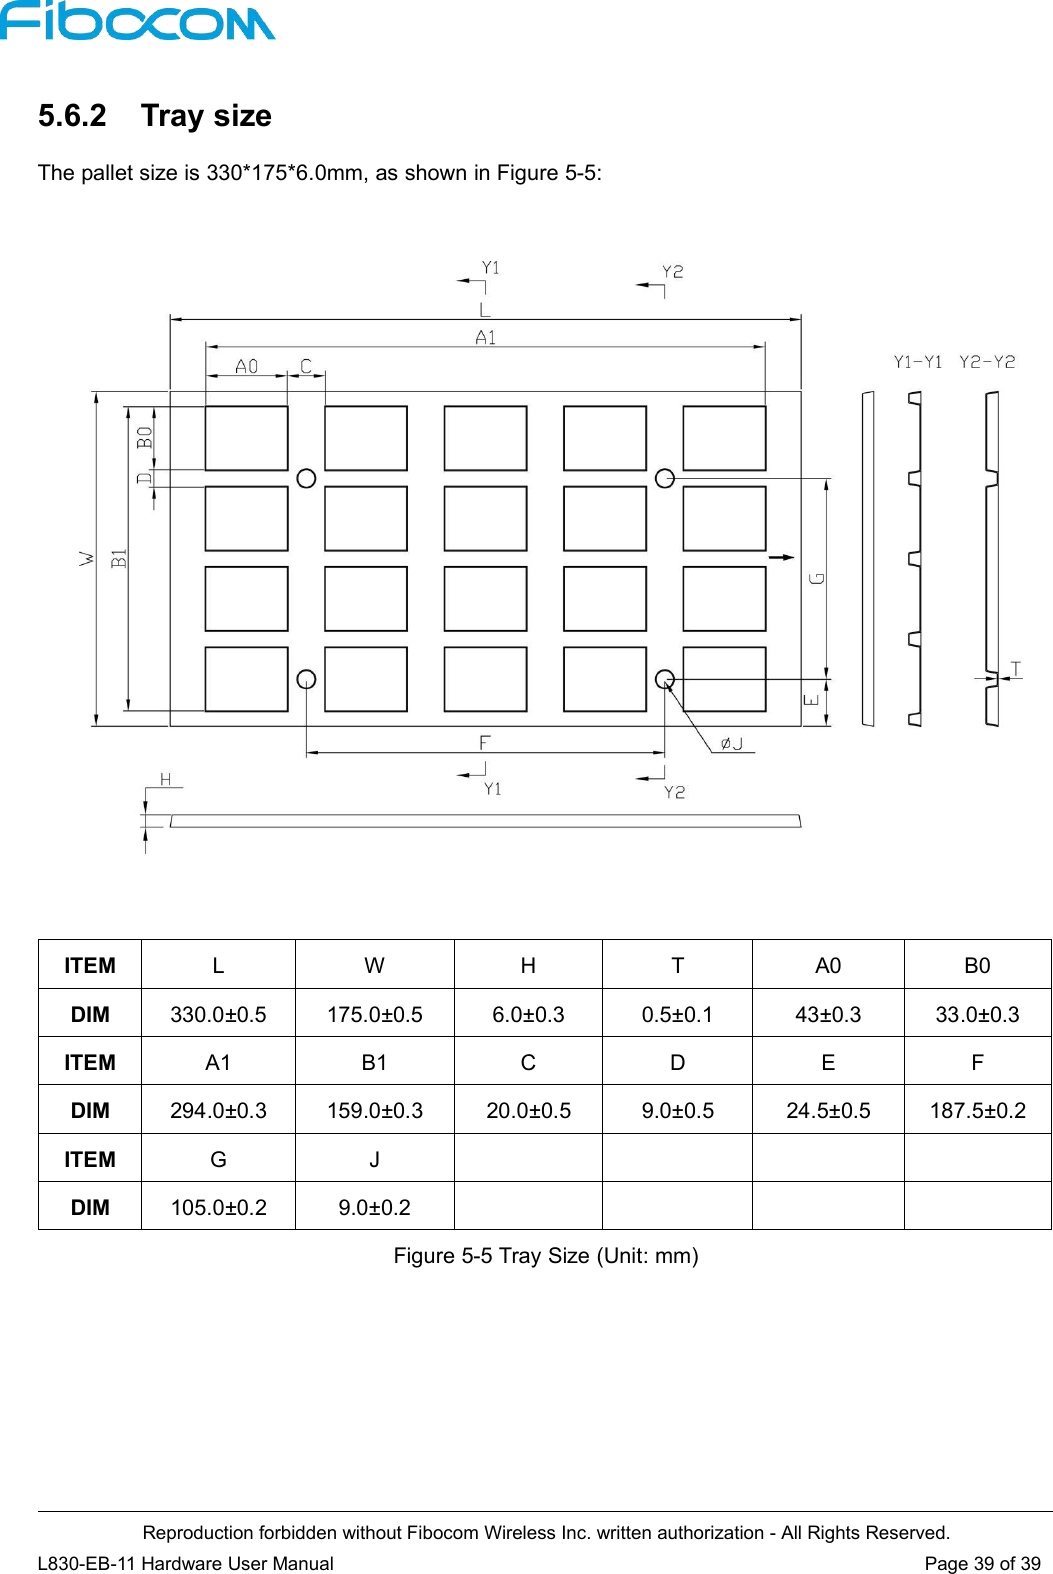 Reproduction forbidden without Fibocom Wireless Inc. written authorization - All Rights Reserved.L830-EB-11 Hardware User Manual Page 39 of 395.6.2 Tray sizeThe pallet size is 330*175*6.0mm, as shown in Figure 5-5:ITEMLWHTA0B0DIM330.0±0.5175.0±0.56.0±0.30.5±0.143±0.333.0±0.3ITEMA1B1CDEFDIM294.0±0.3159.0±0.320.0±0.59.0±0.524.5±0.5187.5±0.2ITEMGJDIM105.0±0.29.0±0.2Figure 5-5 Tray Size (Unit: mm)